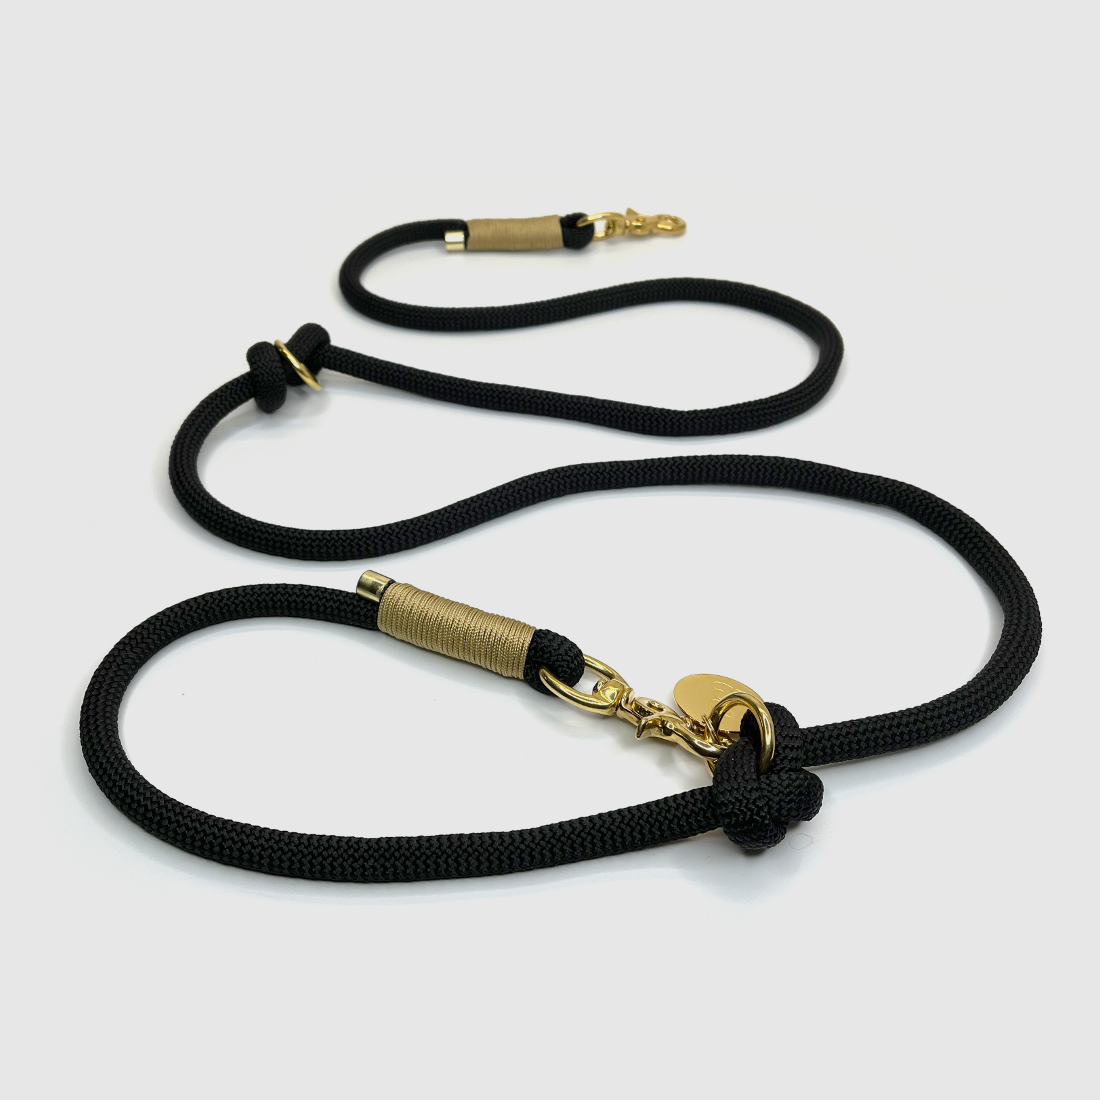 Chicago double ended leash